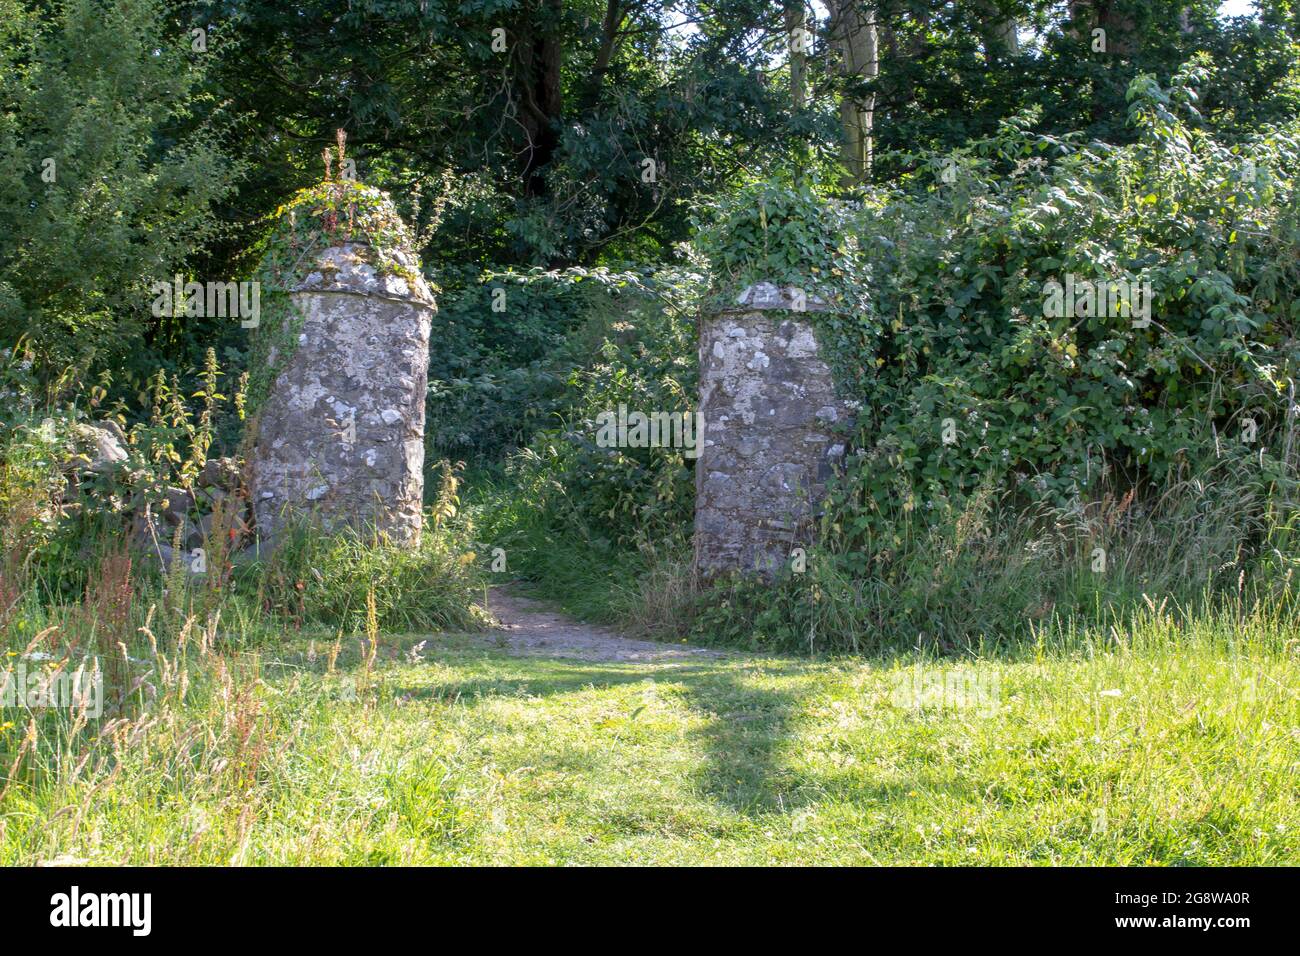 21 July 2021 A pair of old stone pillarson the edge of a wood at the Naitional Trust site of Gibbs Island near Dellamont Country Park Killyleagh Count Stock Photo